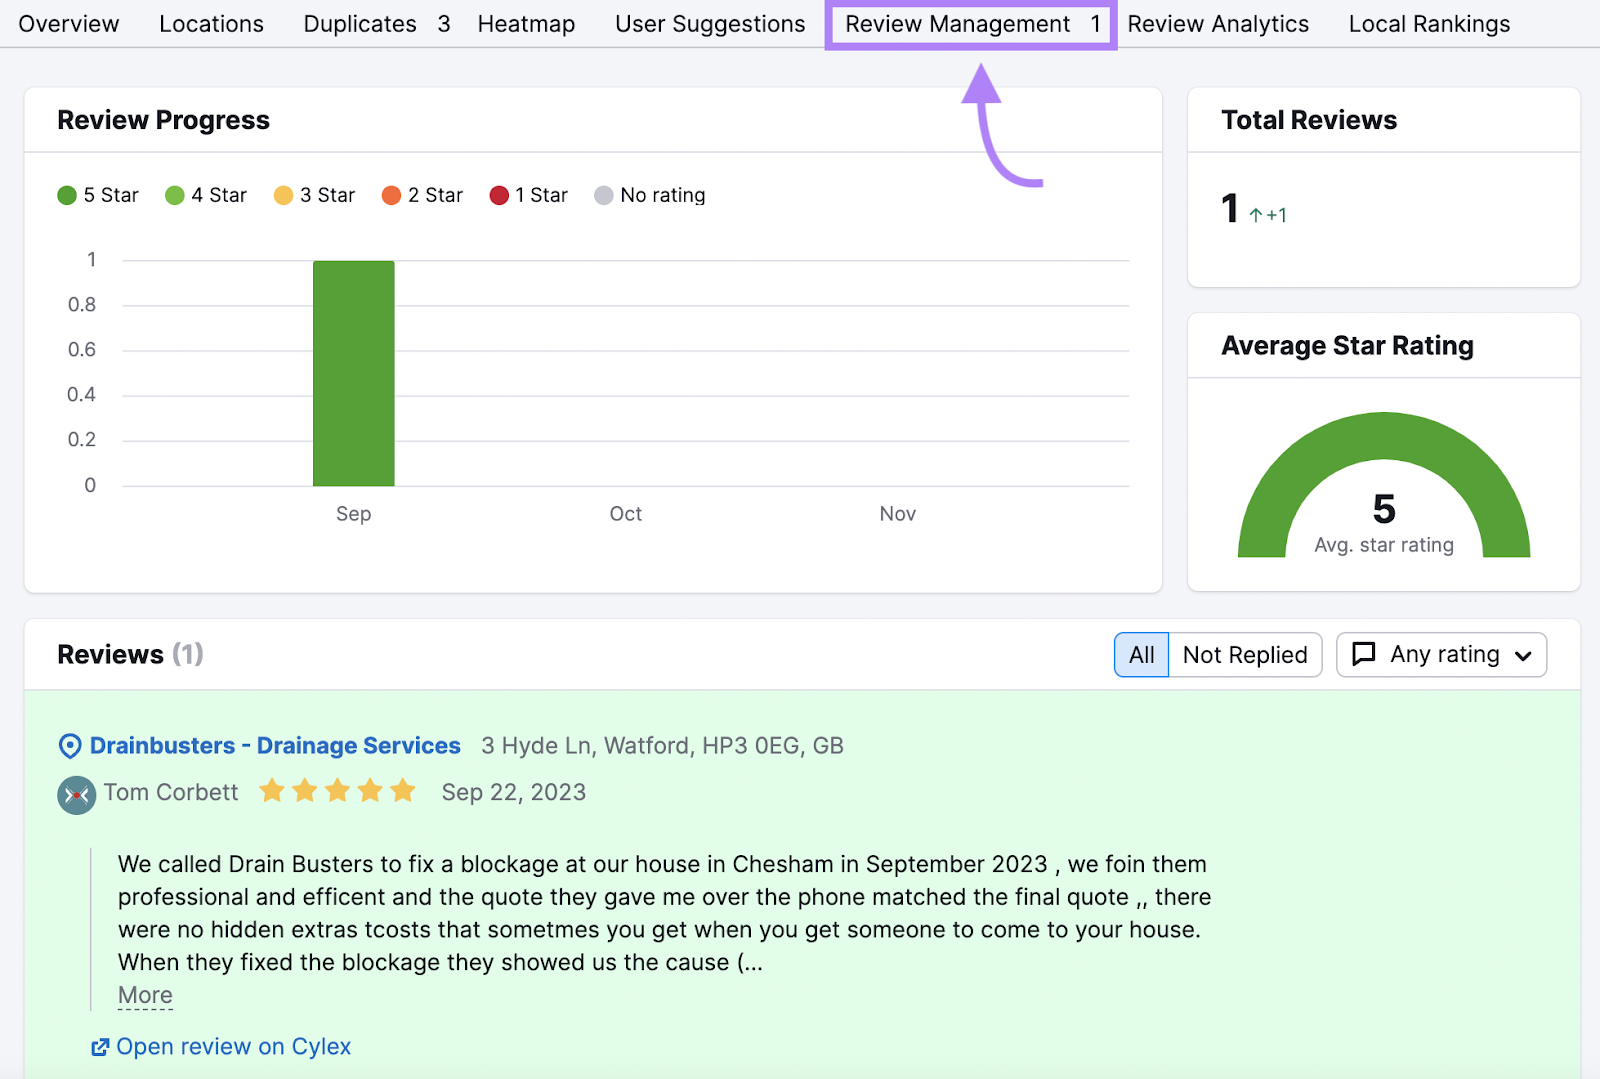 “Review Management” dashboard